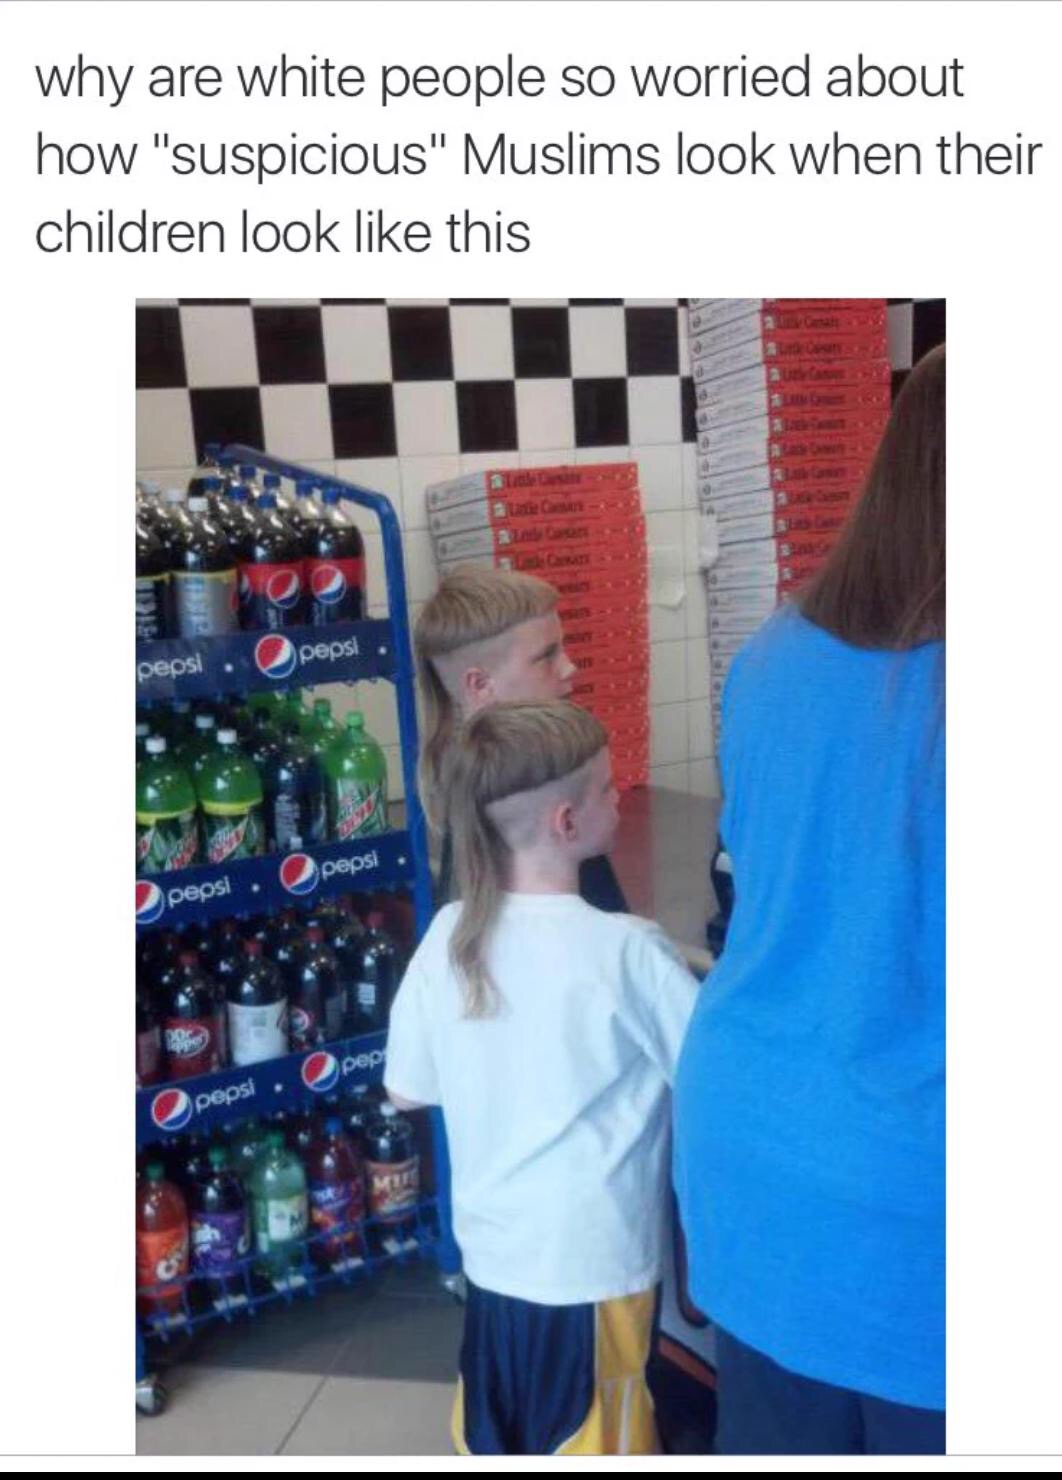 bowl cut mullet kids - why are white people so worried about how "suspicious" Muslims look when their children look this Opepsi pepsi pepsi pepsi pepsi